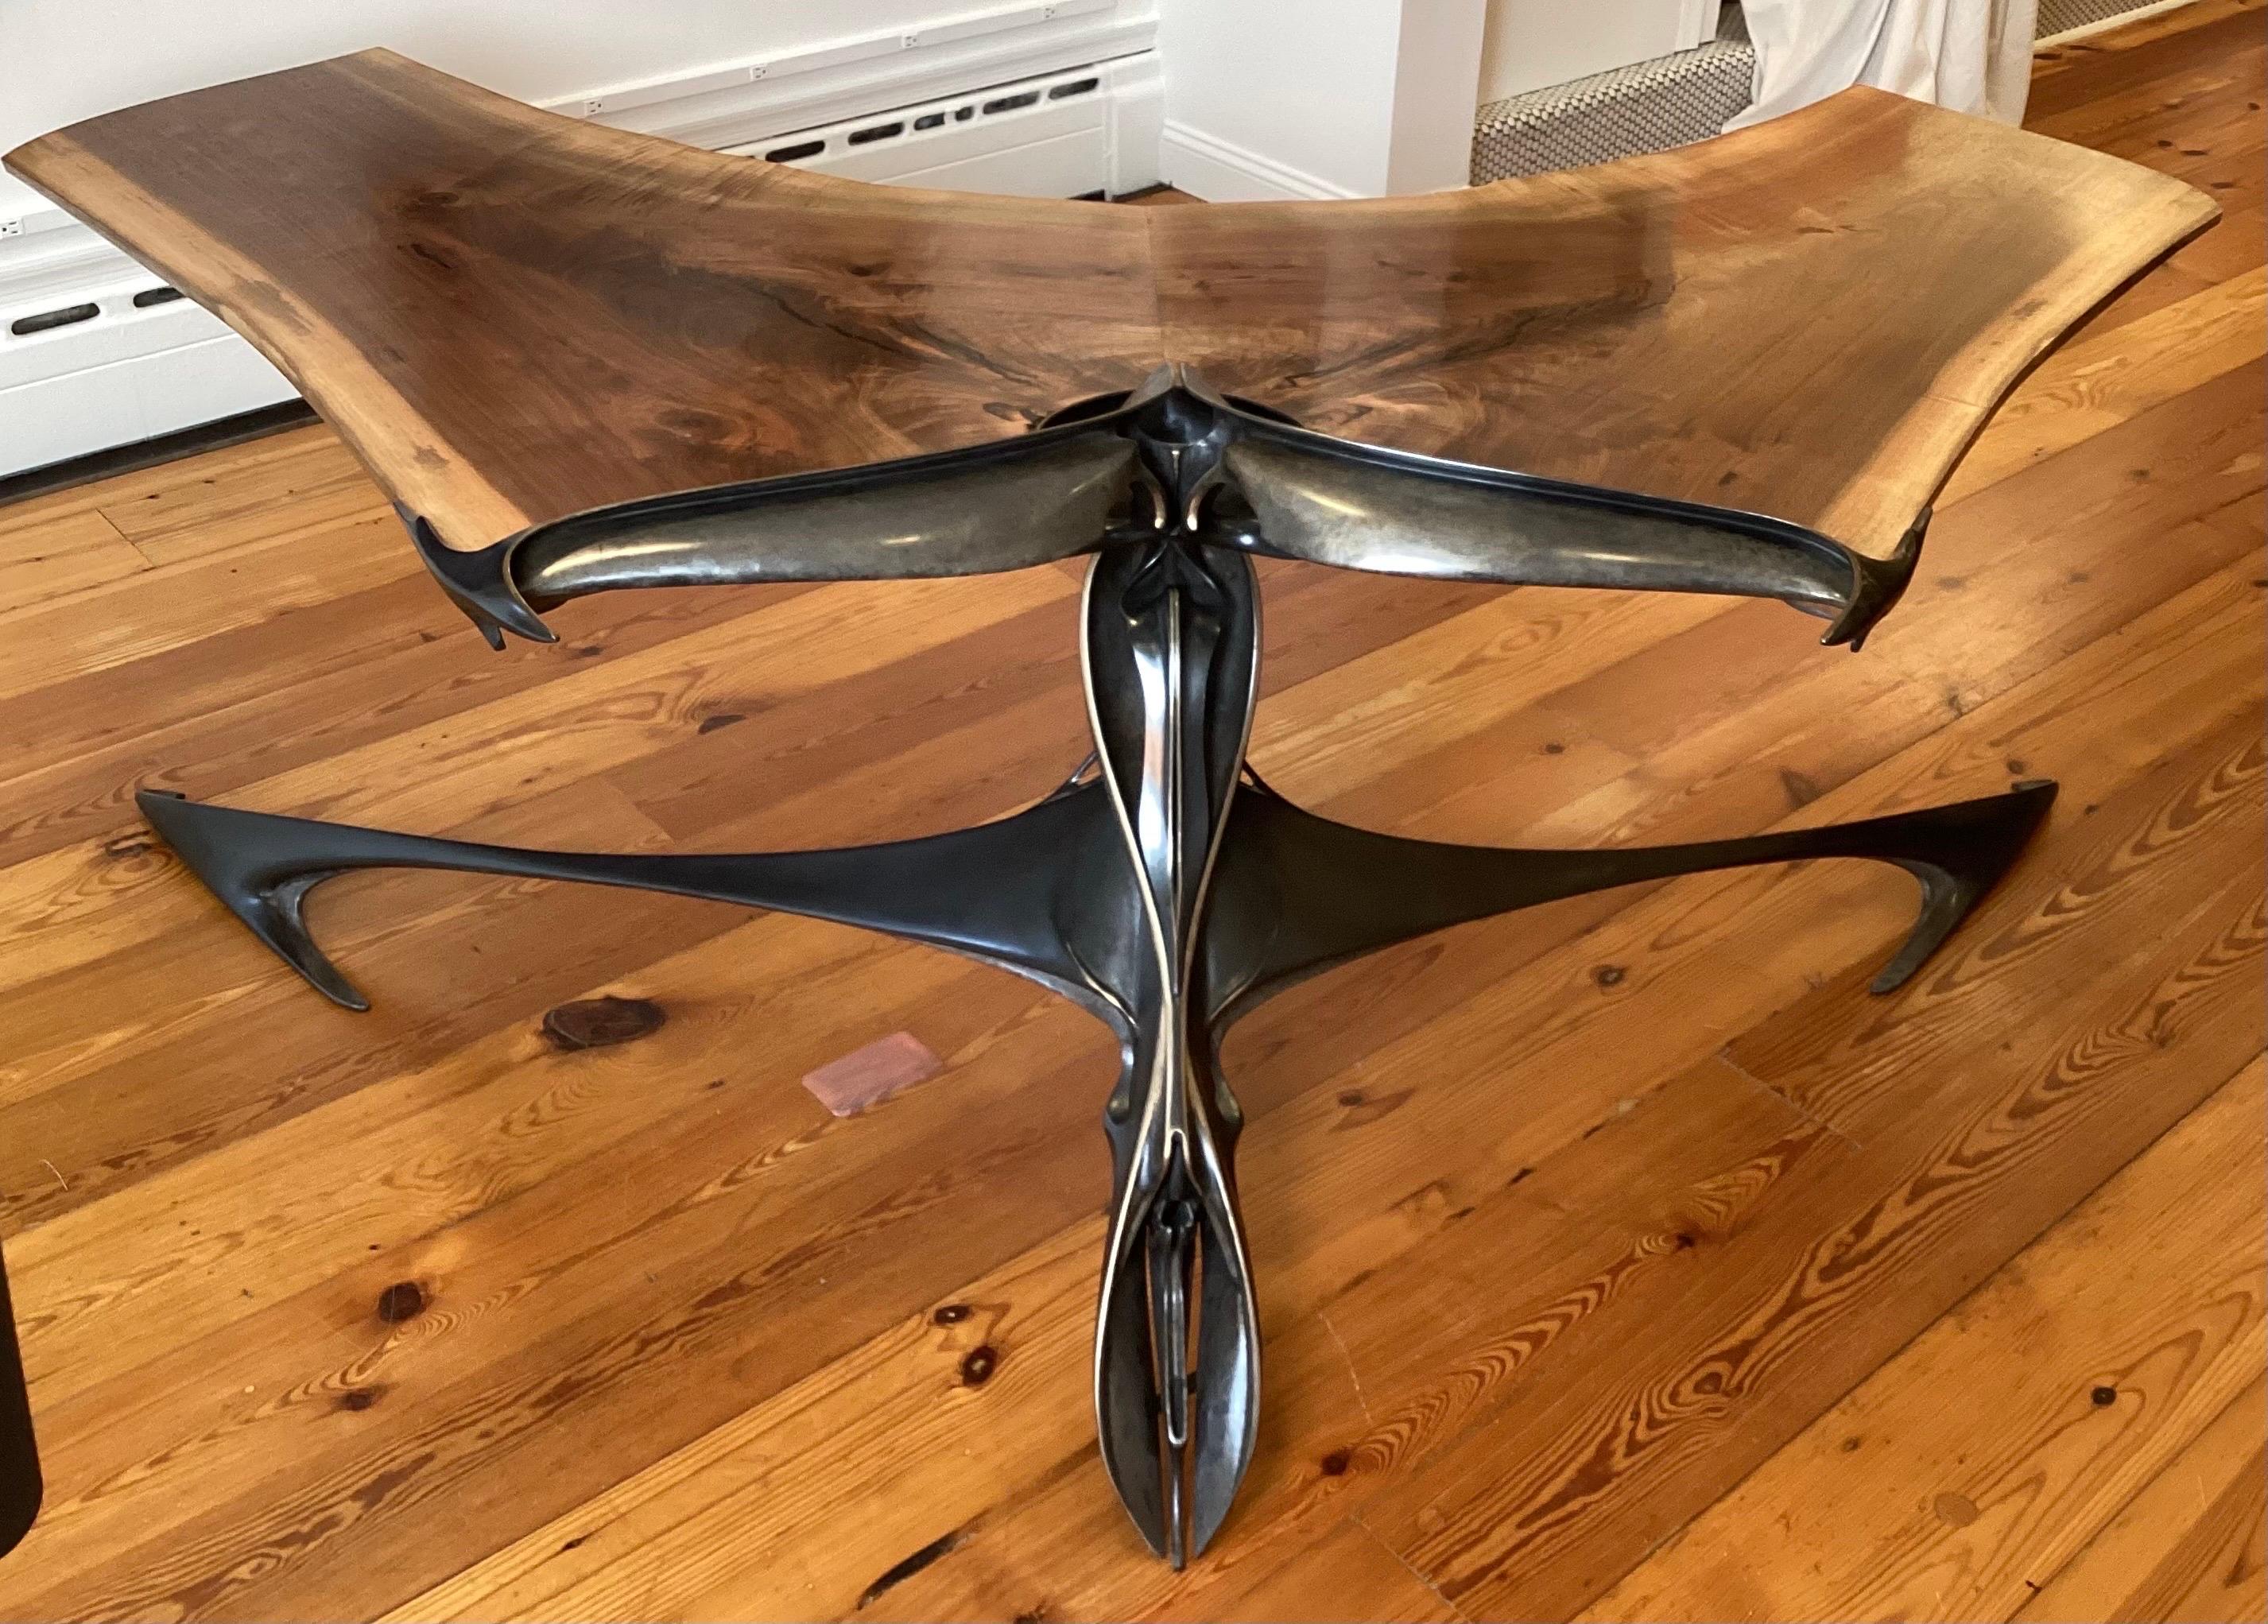 This is a one of a kind desk with a sculpted bronze base and live edge walnut top.  The artist, Lawrence Welker IV created the base to resemble a moth.  The desk surface is two joined live edge book matched slabs of solid walnut representing wings. 